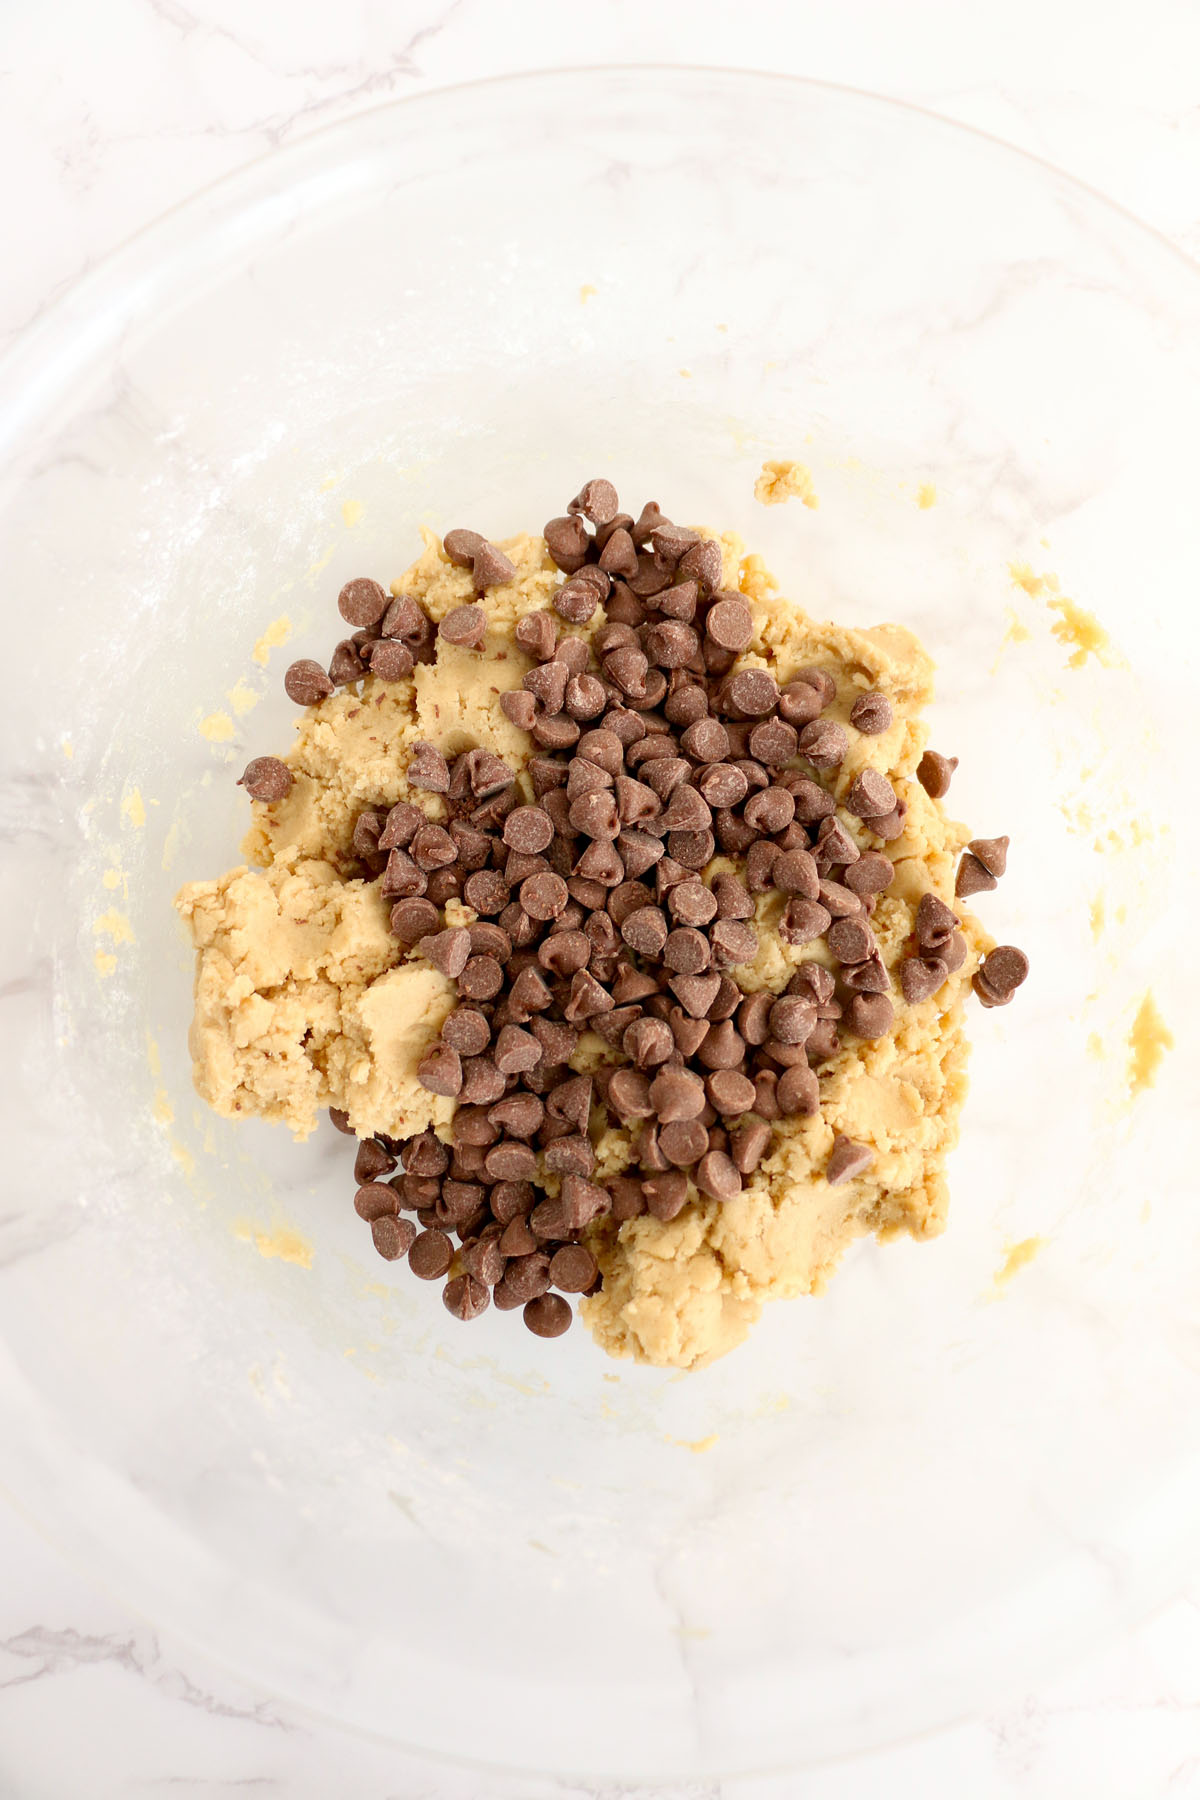 add chocolate chip to the dough